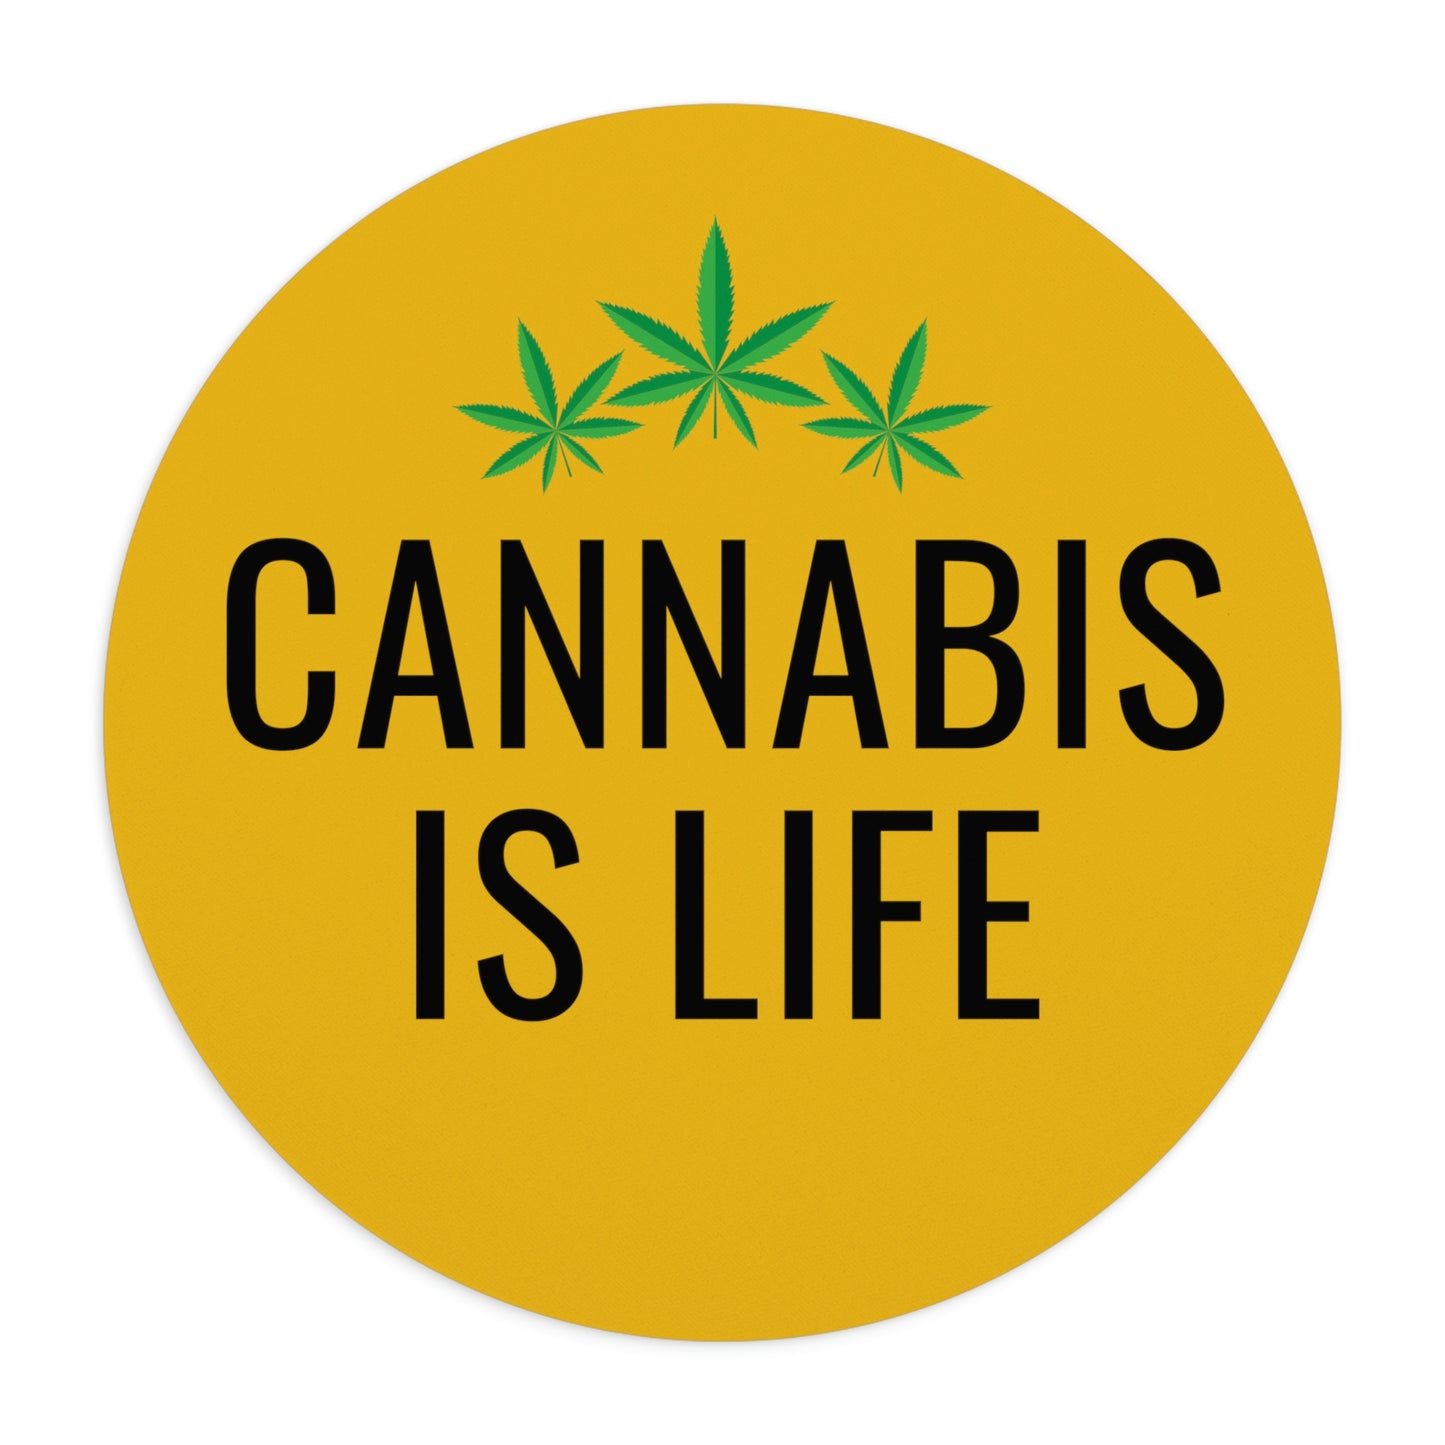 Round Cannabis is Life yellow mouse pad with the phrase "cannabis is life" in black text, flanked by three green cannabis leaves.